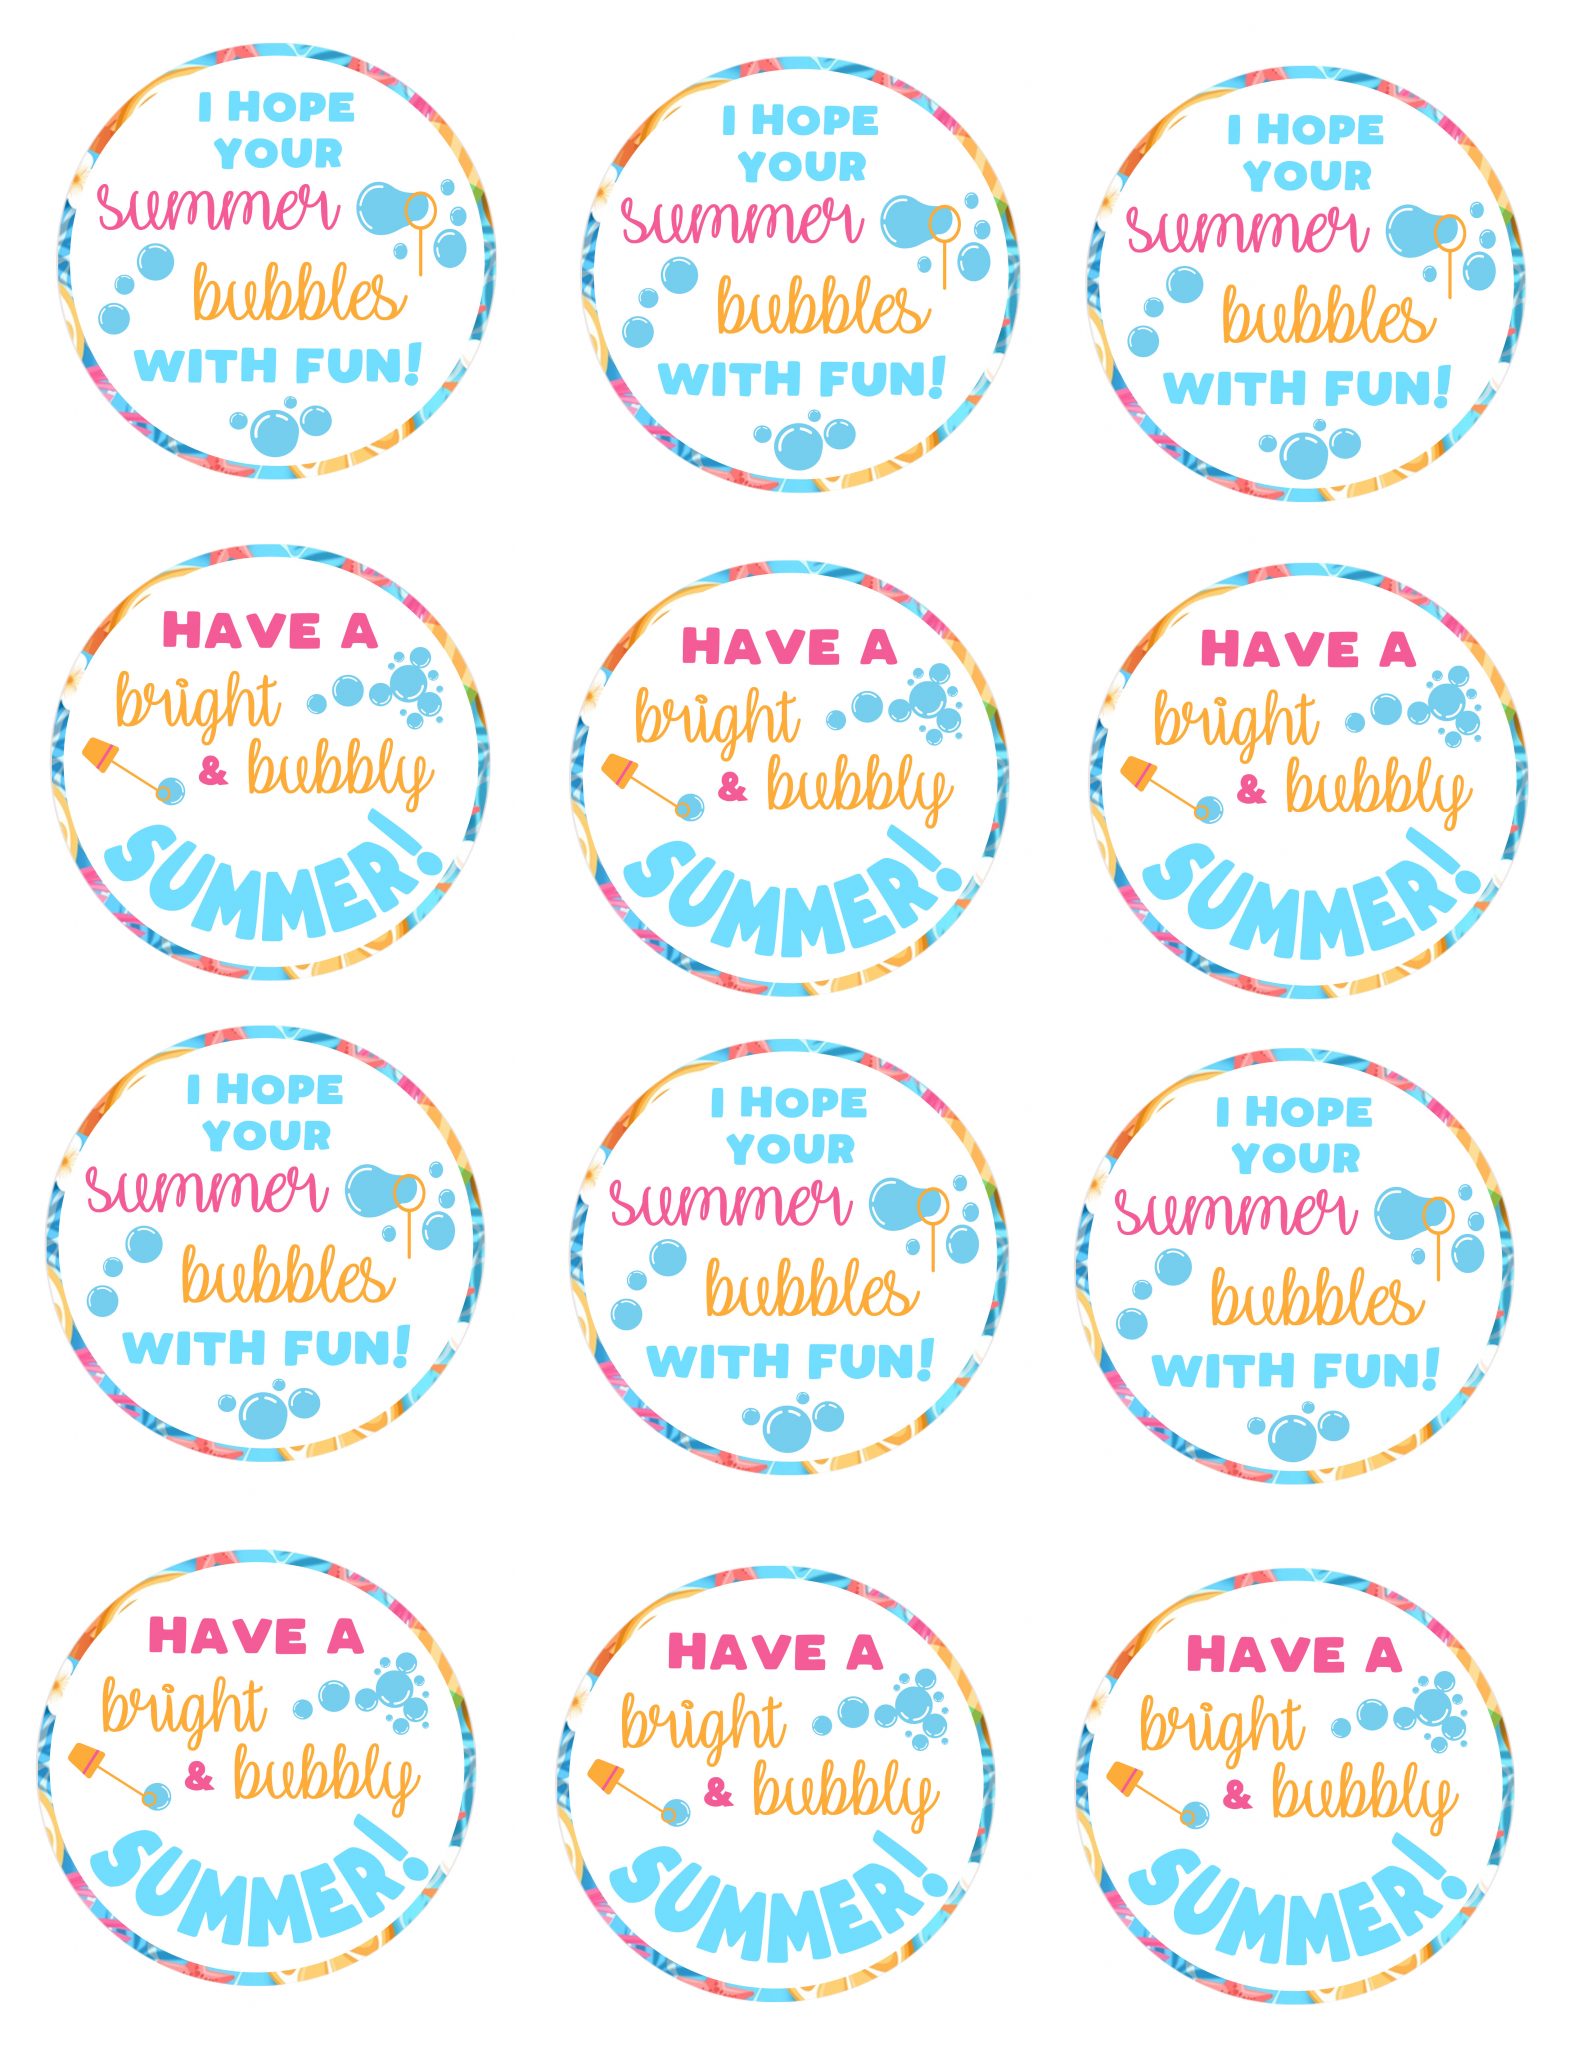 Free Printable Gift Tags For Bubbles